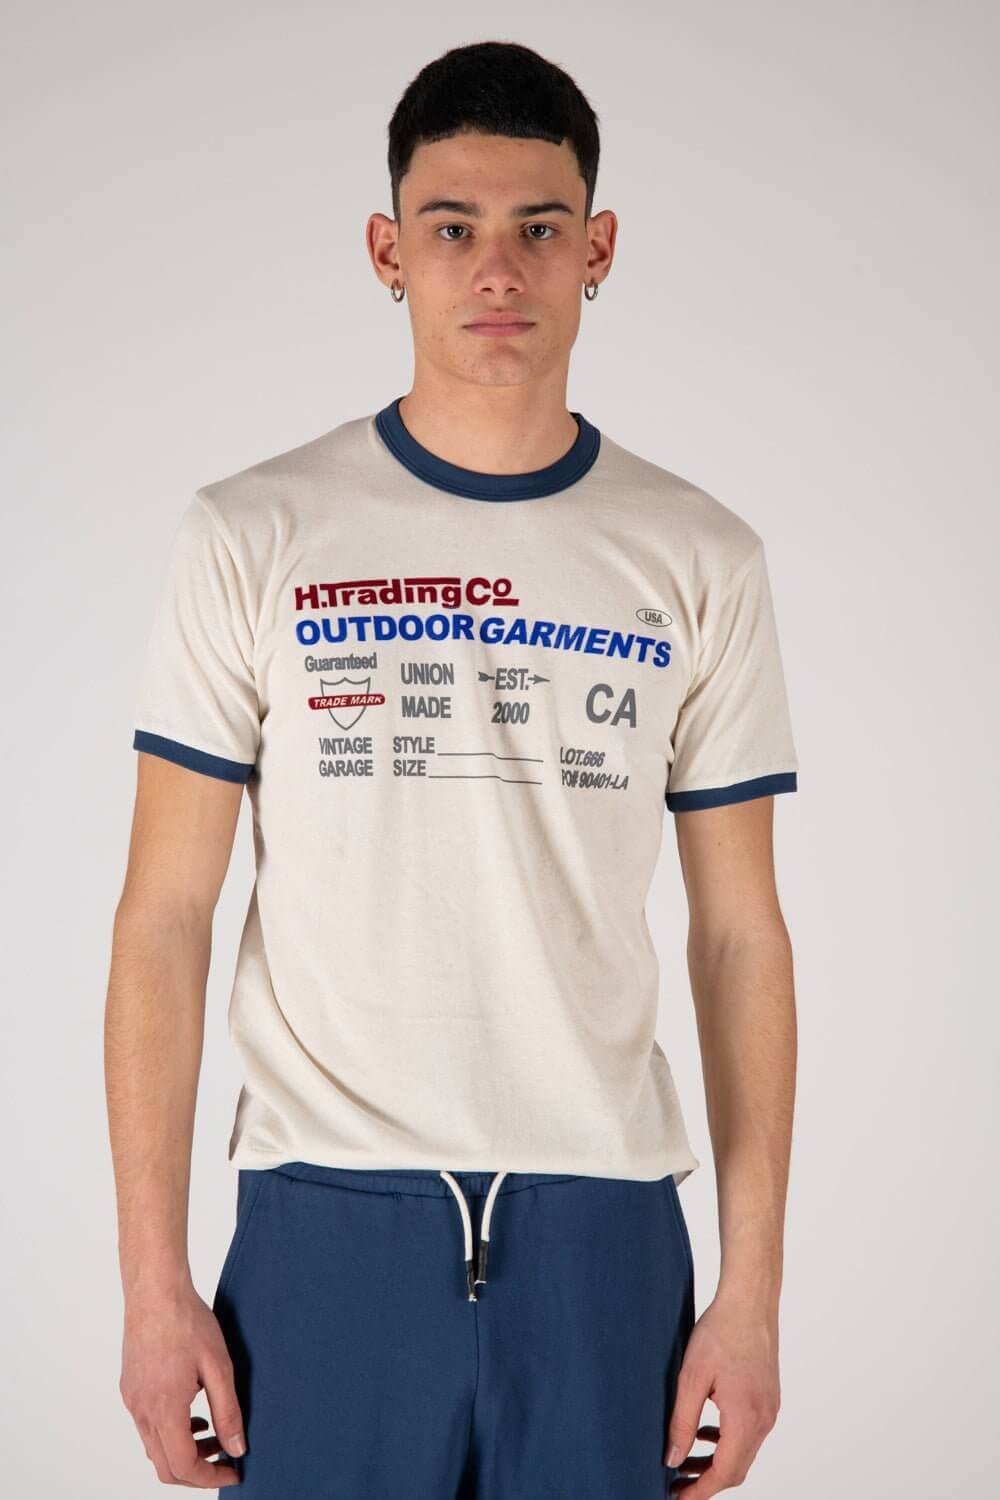 ARMLESS - OUTDOOR Regular fit t-shirt printed on the front. Composition: 100% Cotton HTC LOS ANGELES